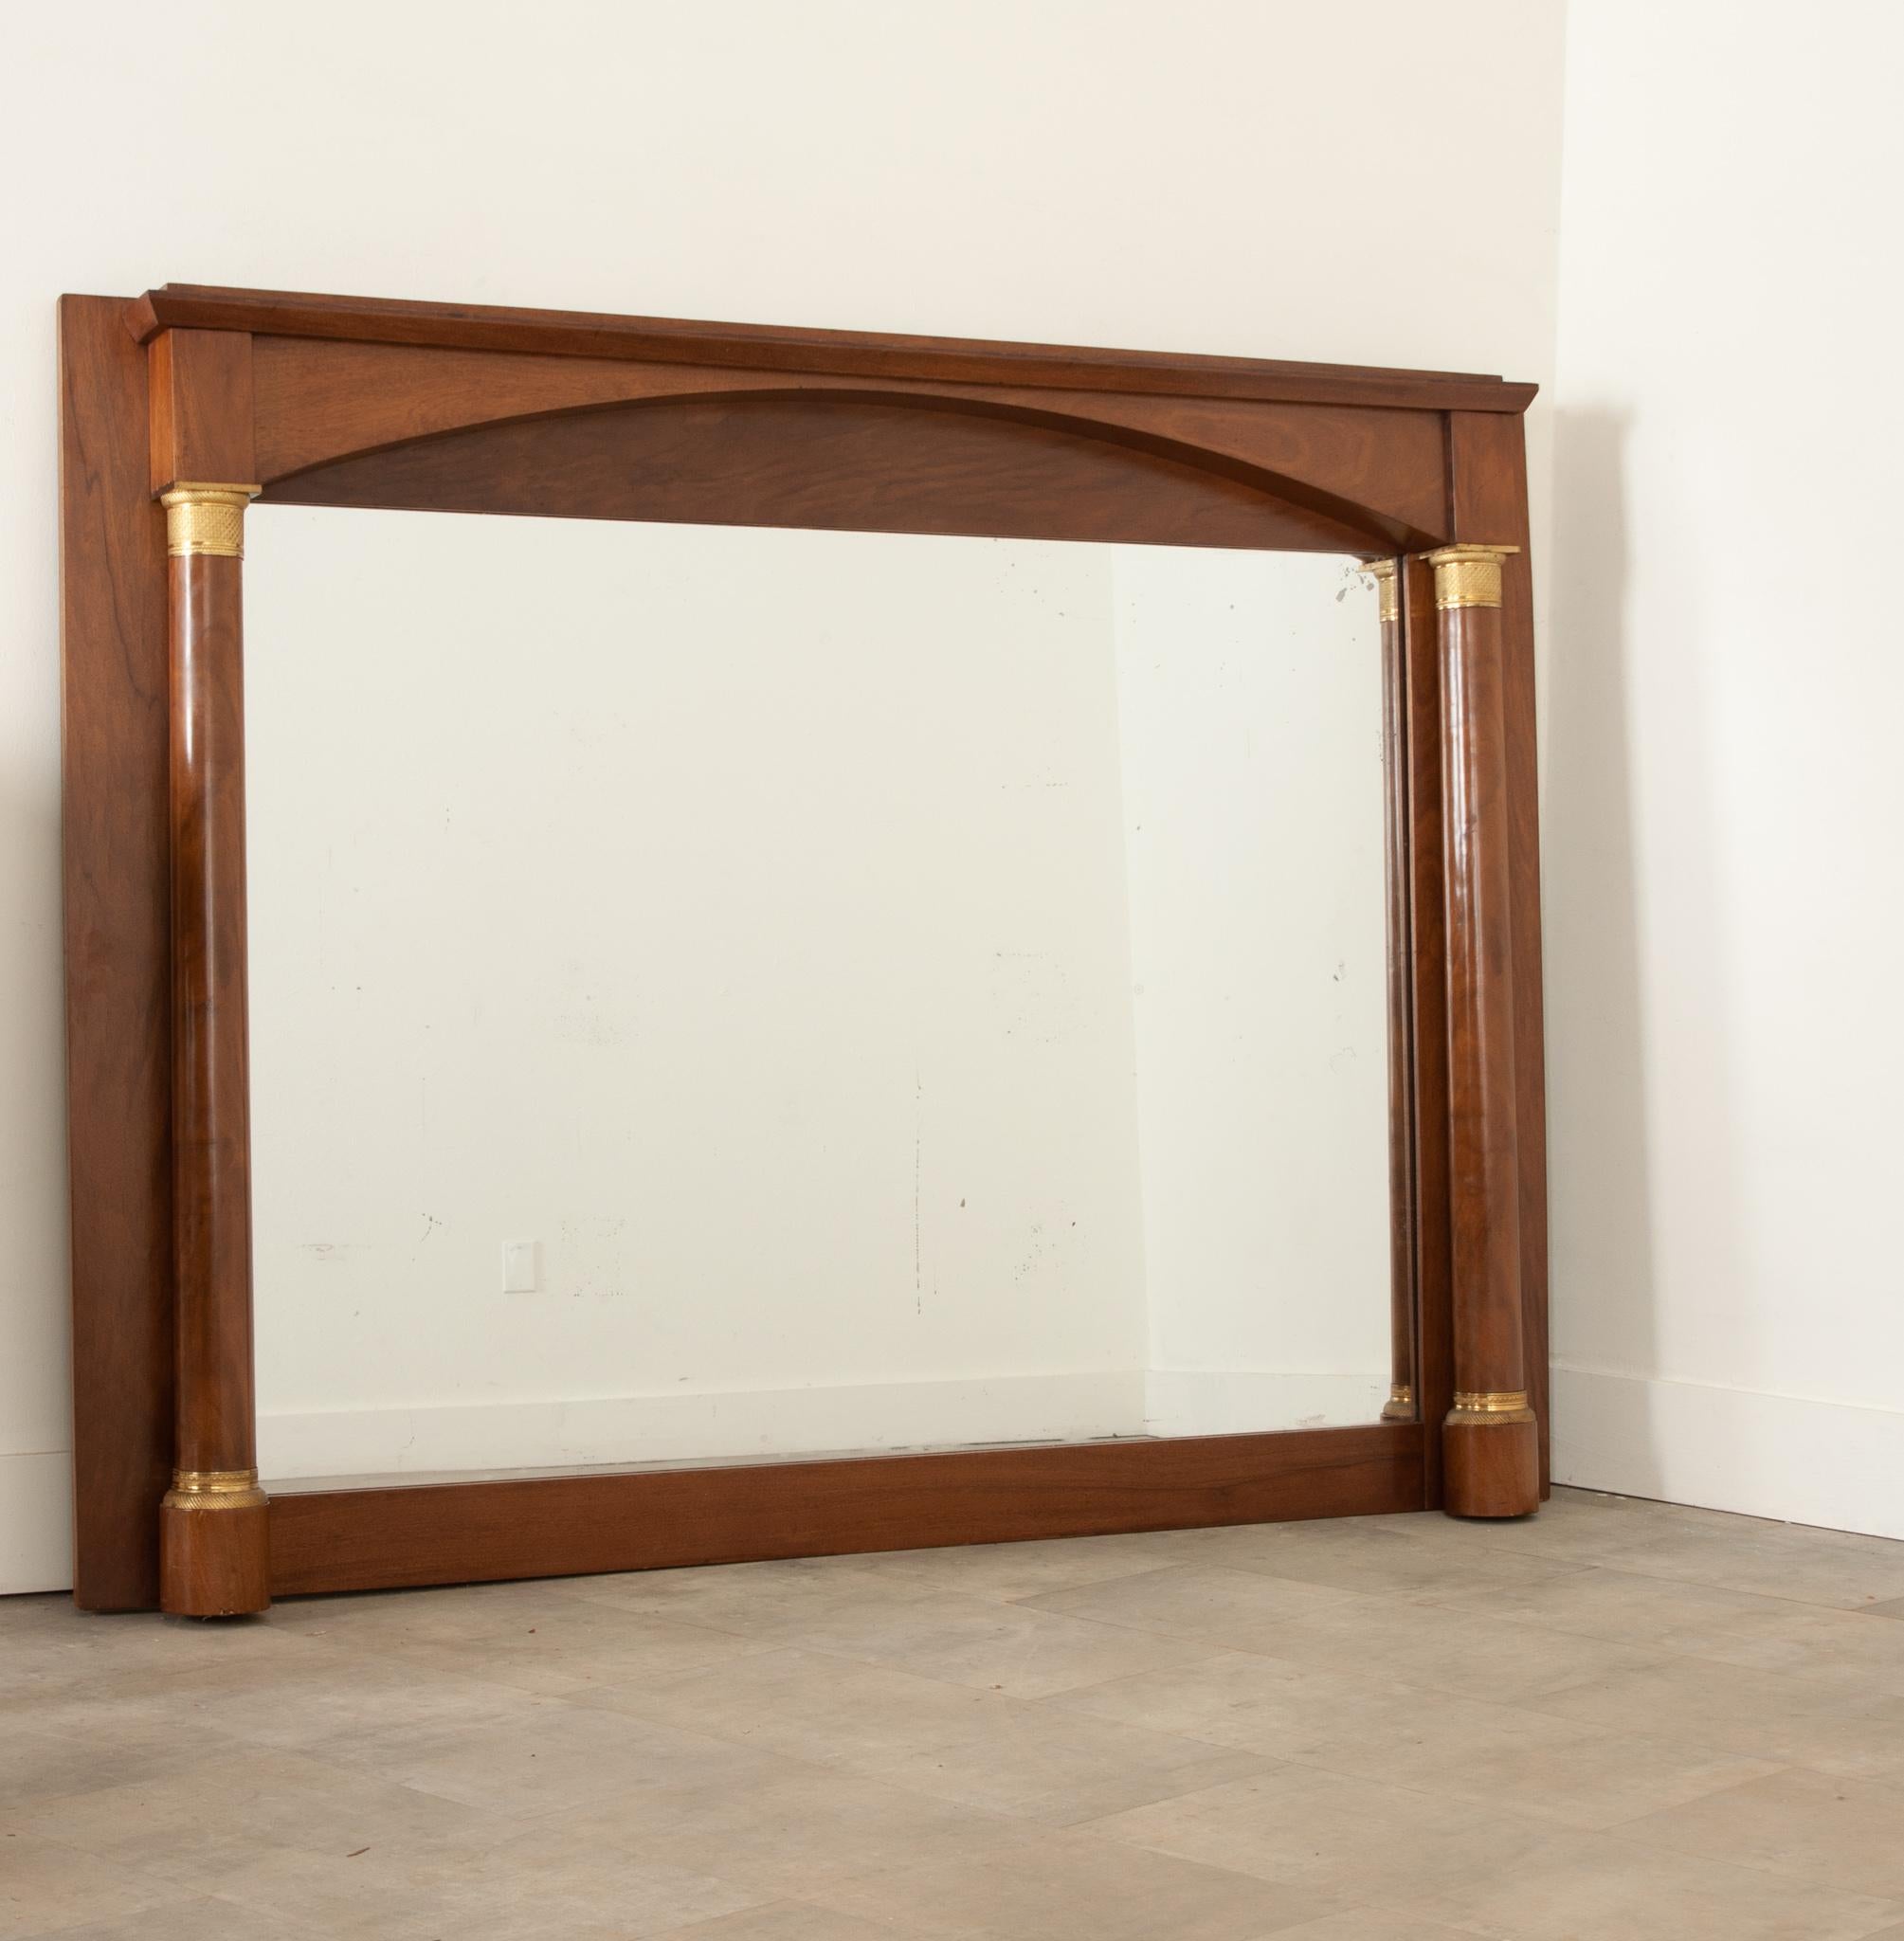 A stately, Empire style mantle mirror from France with some light foxing throughout the original mercury mirror plate. The minimally carved mahogany has gained a fine patina. Bright, cast brass capital and bases adorn the column forms flanking the